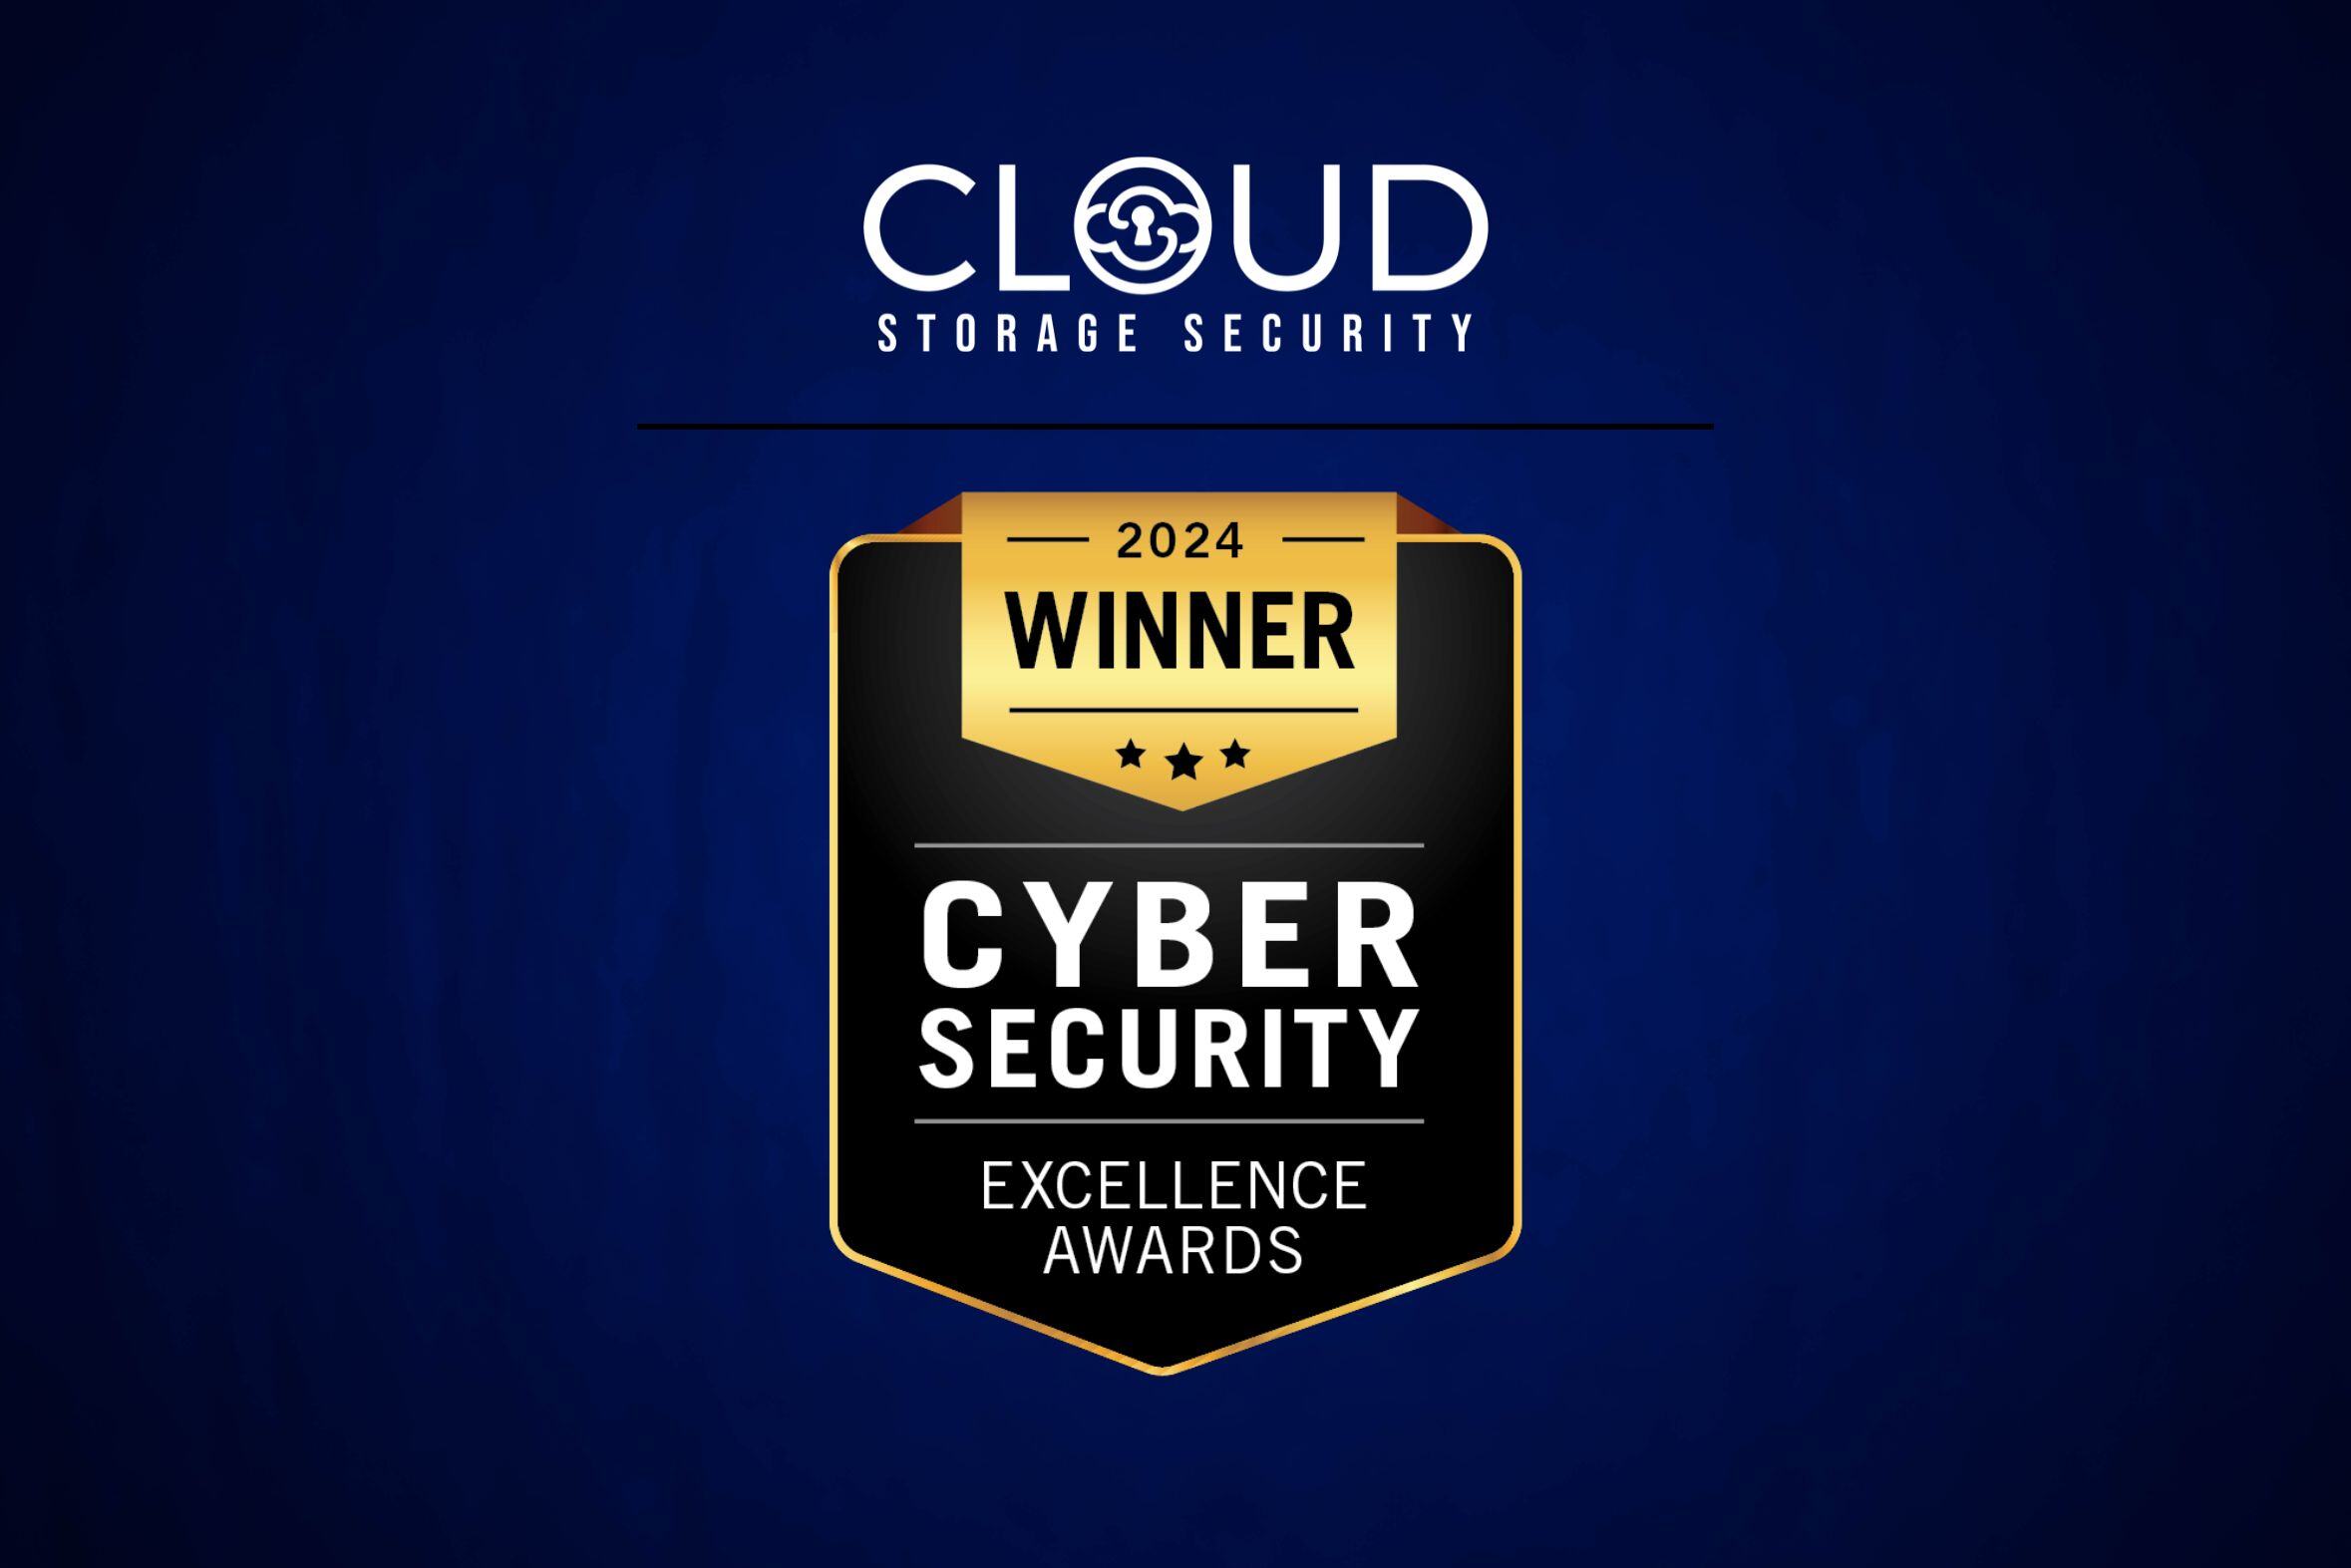 Cybersecurity Excellence Awards Winner's badge below the Cloud Storage Security Logo